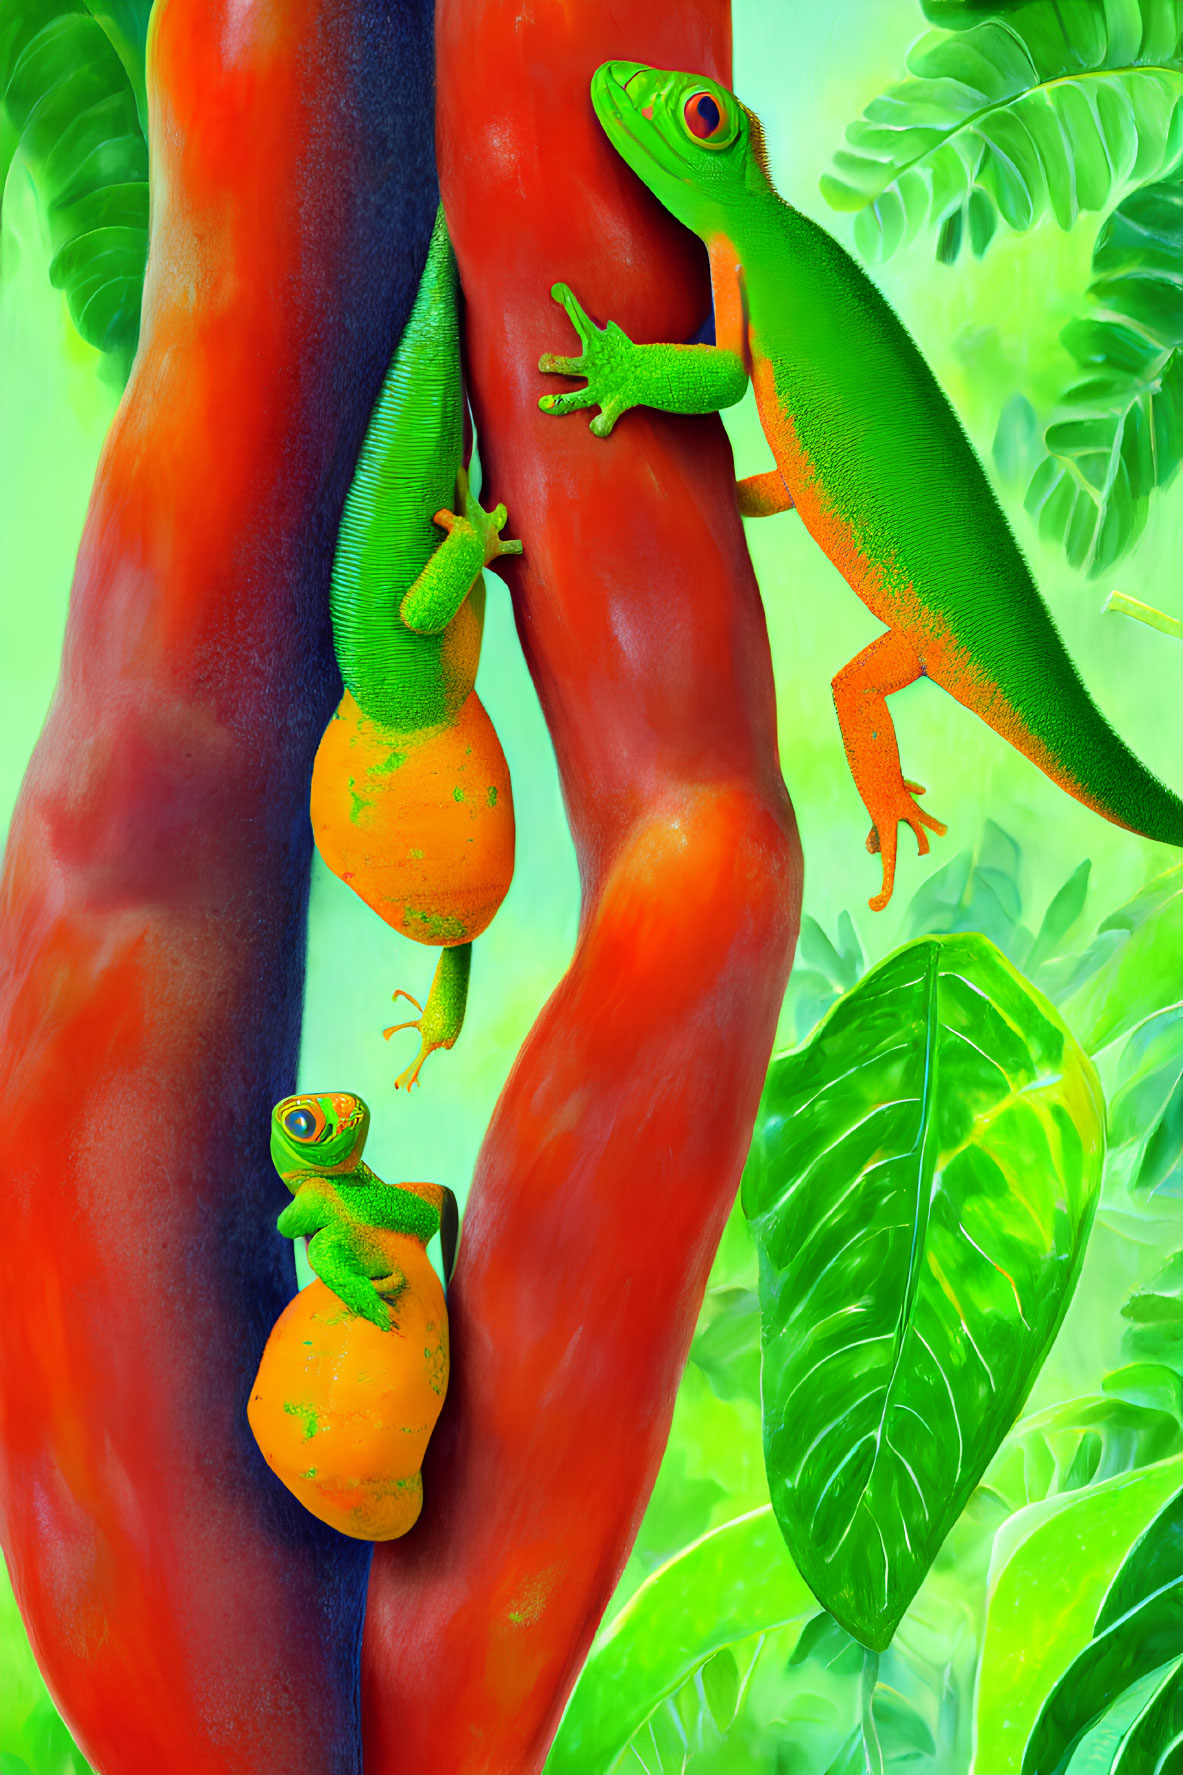 Three green geckos with orange spots on red vines in lush green foliage